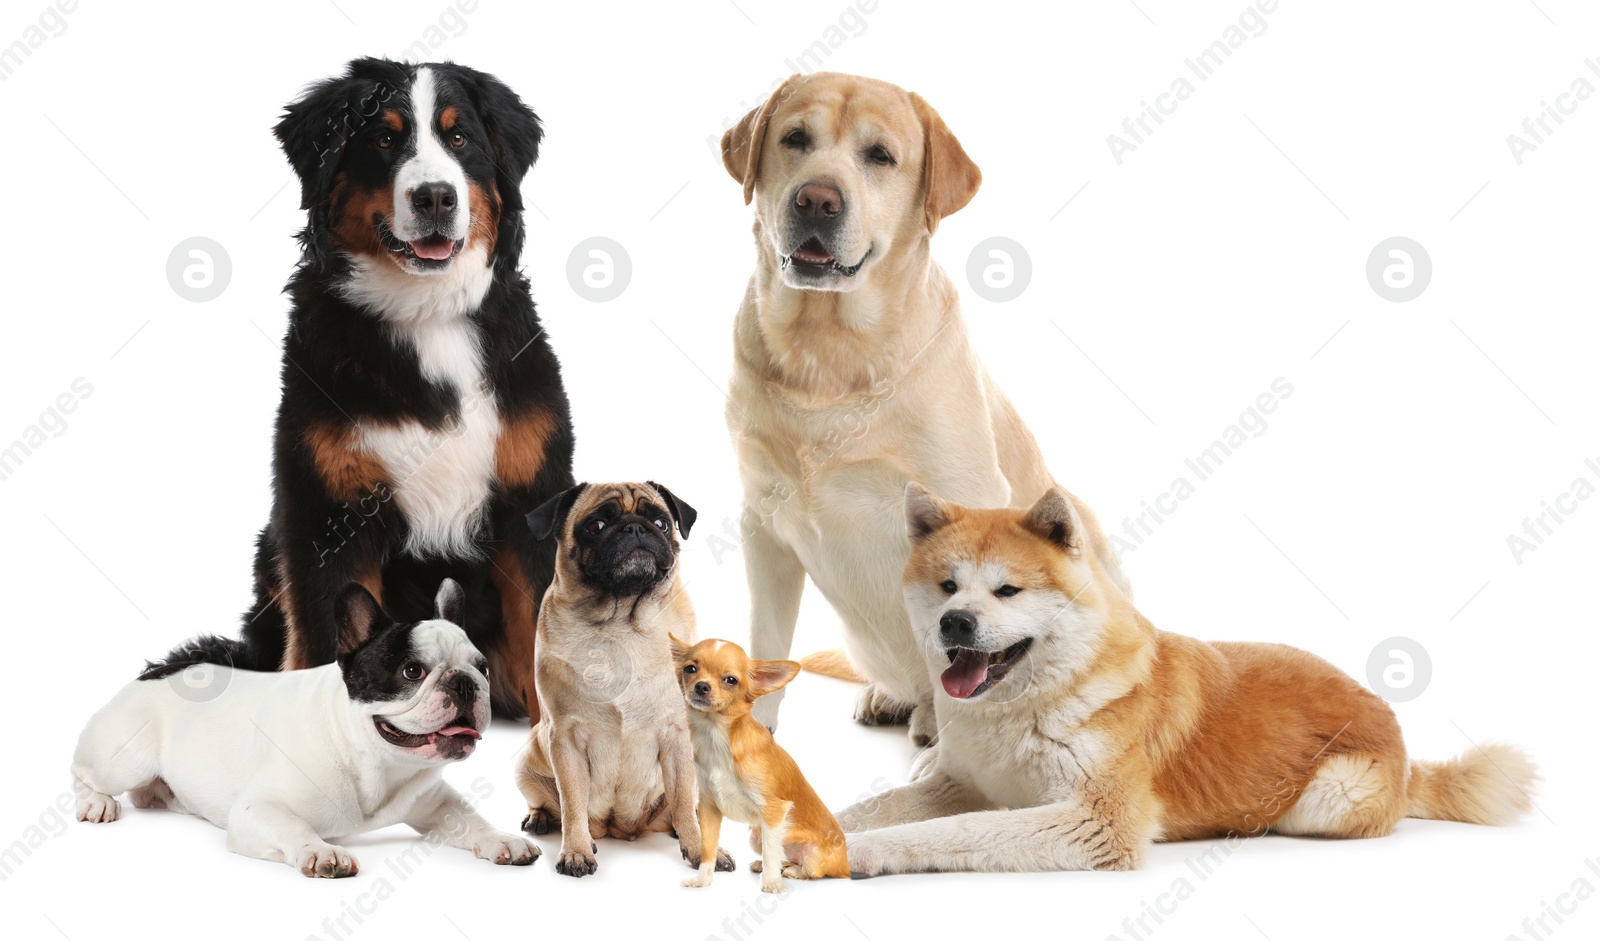 Image of Different breeds of dogs on white background